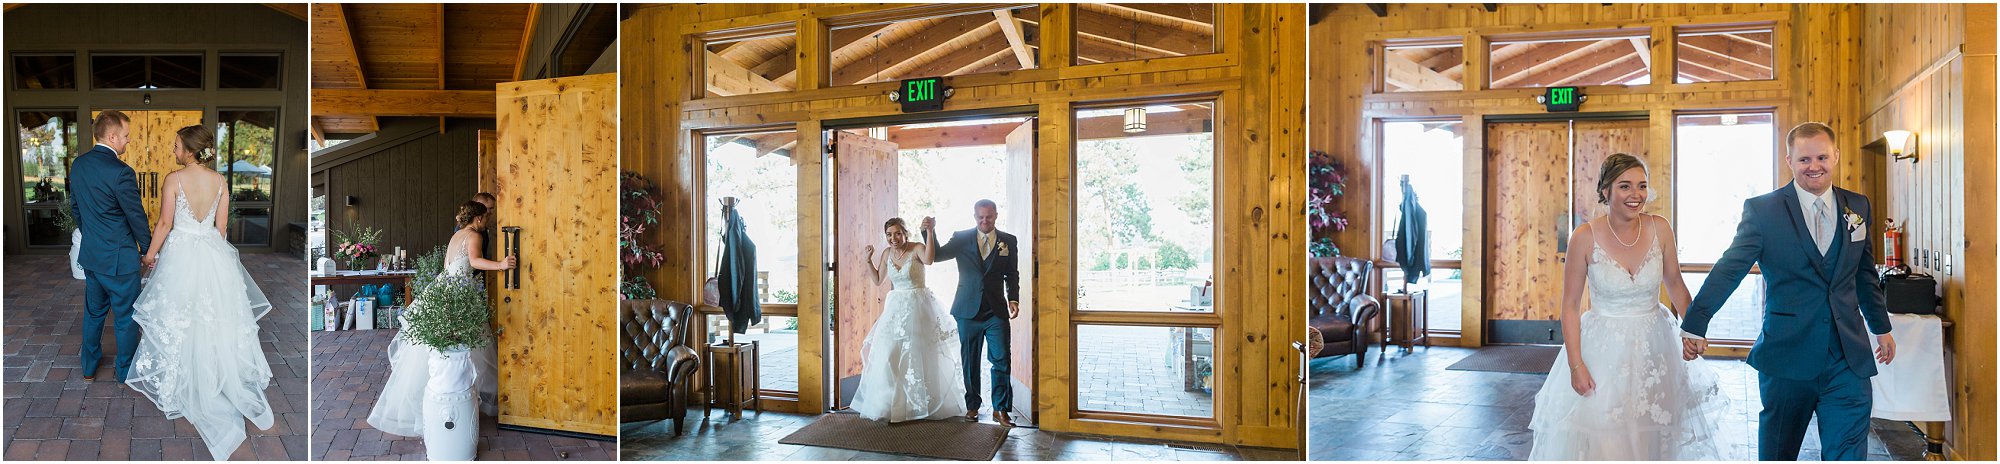 The sweet couple makes their grand entrance into the reception through the double doors of the Rock Springs Ranch wedding venue in Bend, OR. | Erica Swantek Photography